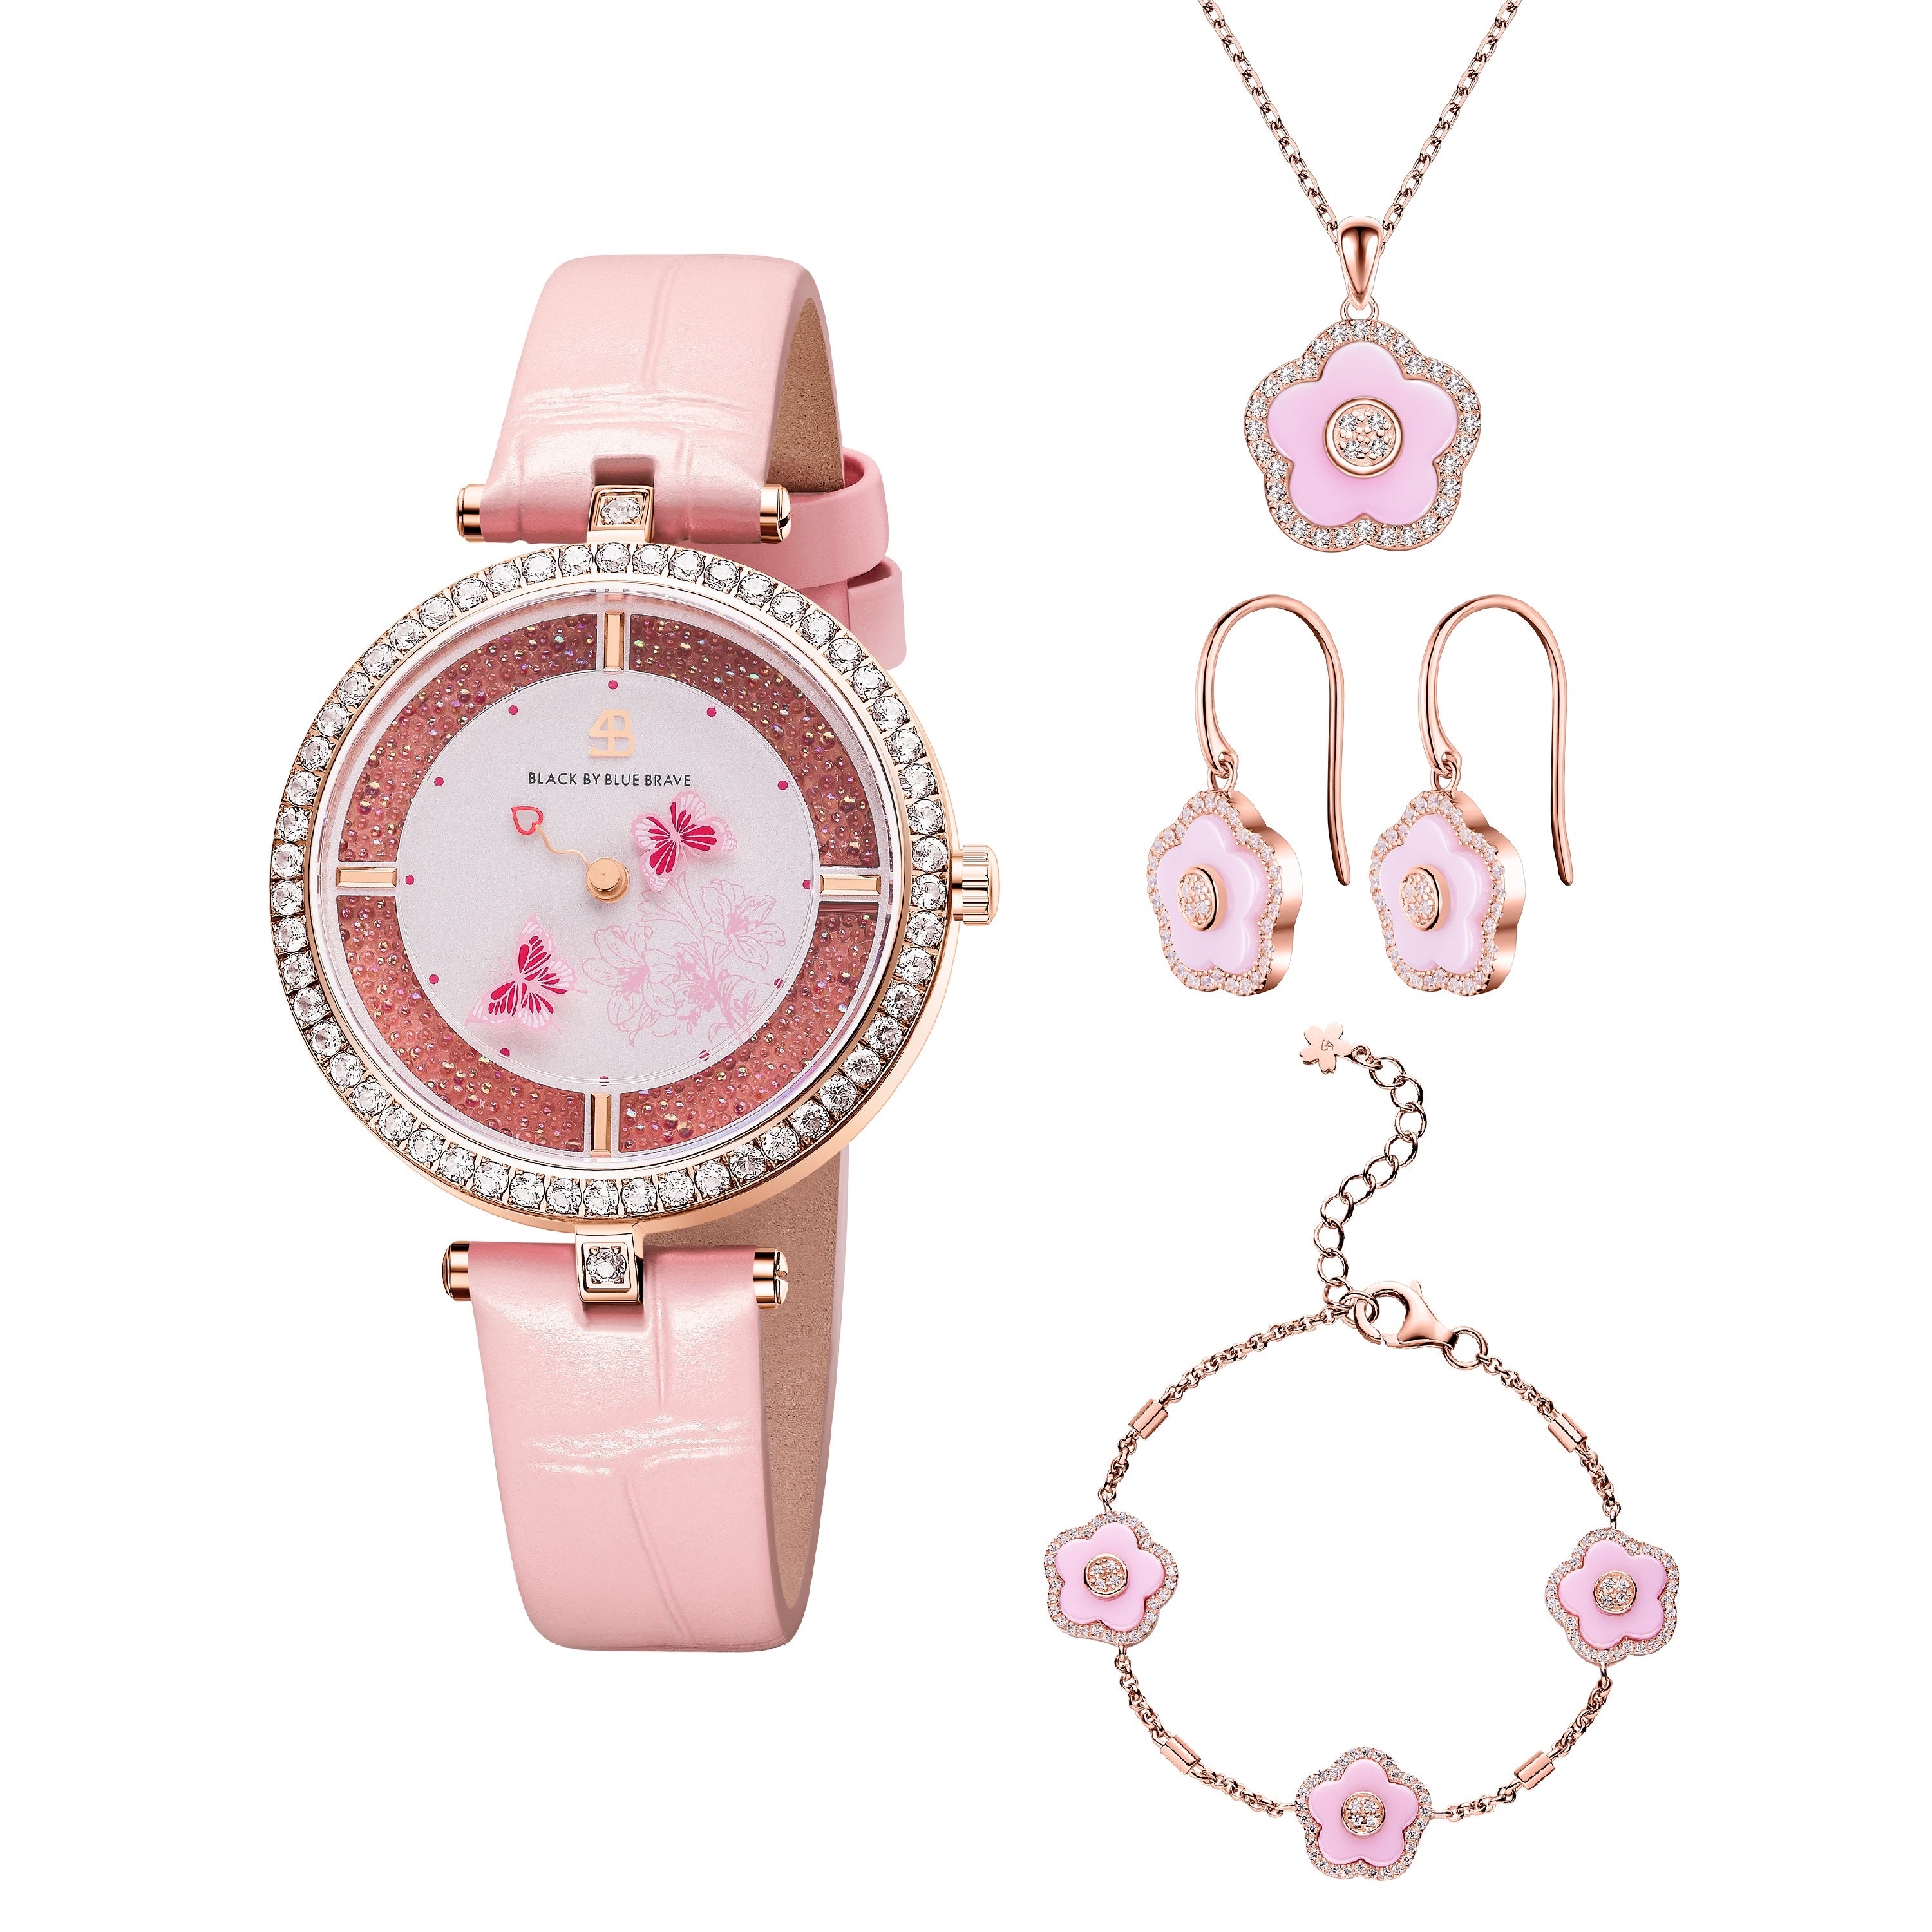 Pink Butterfly Lovers Watch With Flower Ceramic Jewelleries (Earrings, Necklace and Bracelet)